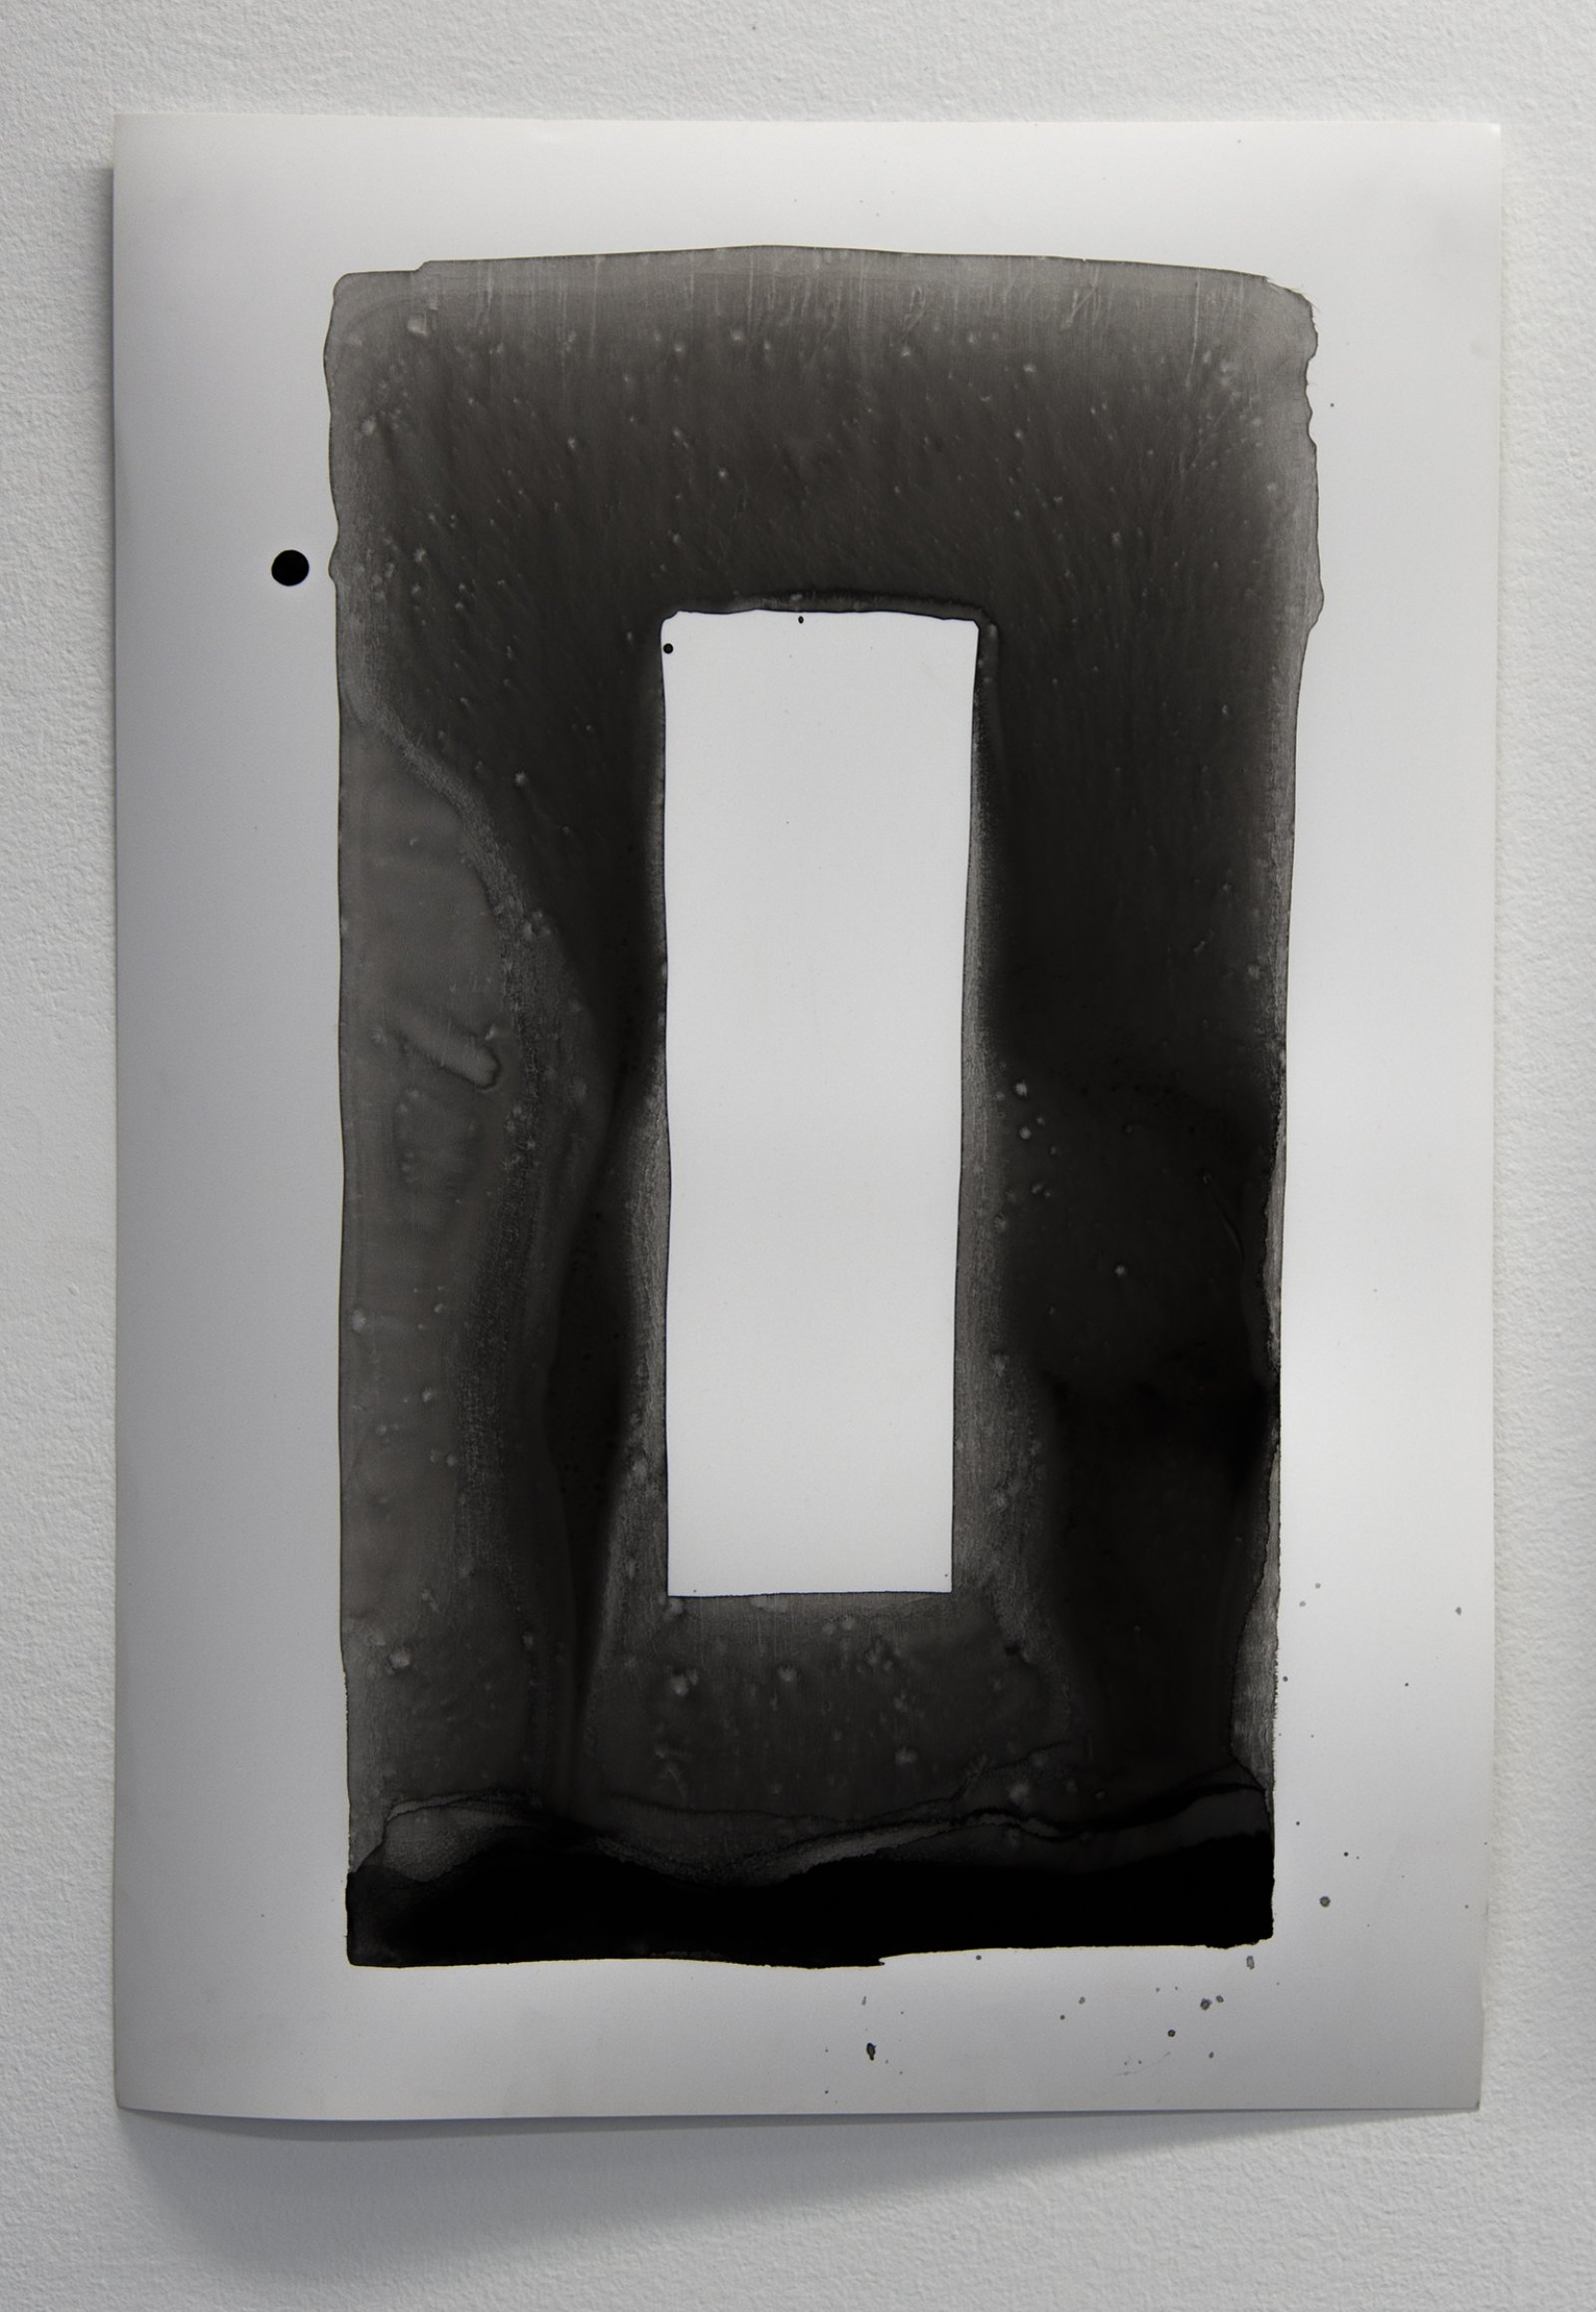 Abbas Akhavan, Untitled, 2013–ongoing, ink on photo-degradable stone paper, 25 x 17 in. (63 x 44 cm)